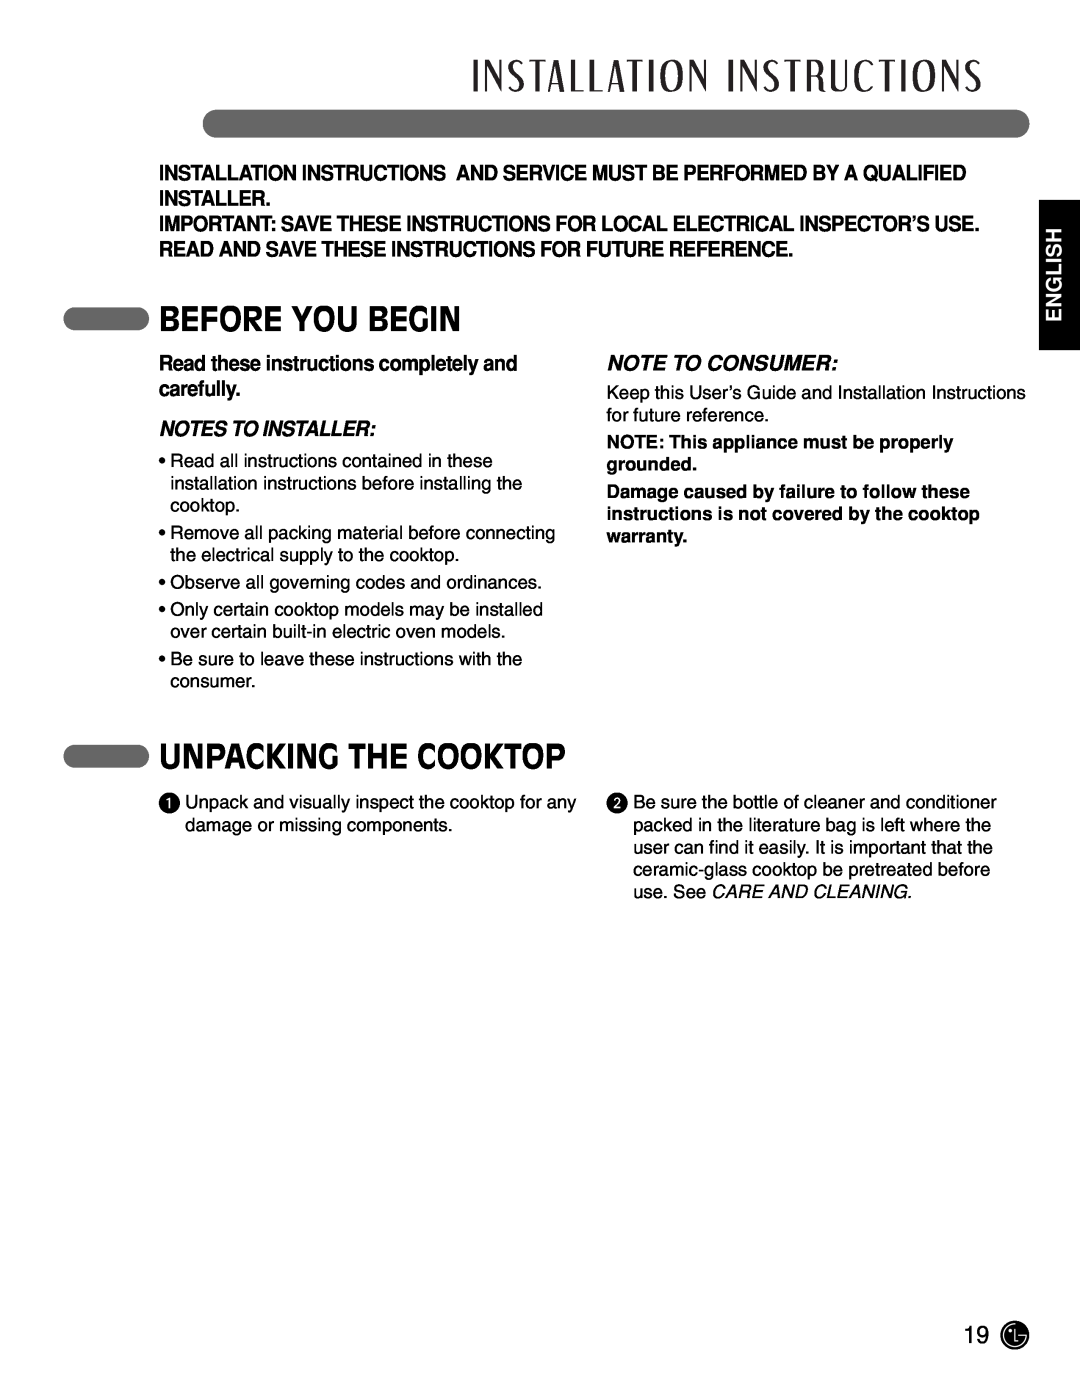 LG Electronics LCE3081ST manual Before You Begin, Unpacking The Cooktop, Read these instructions completely and carefully 